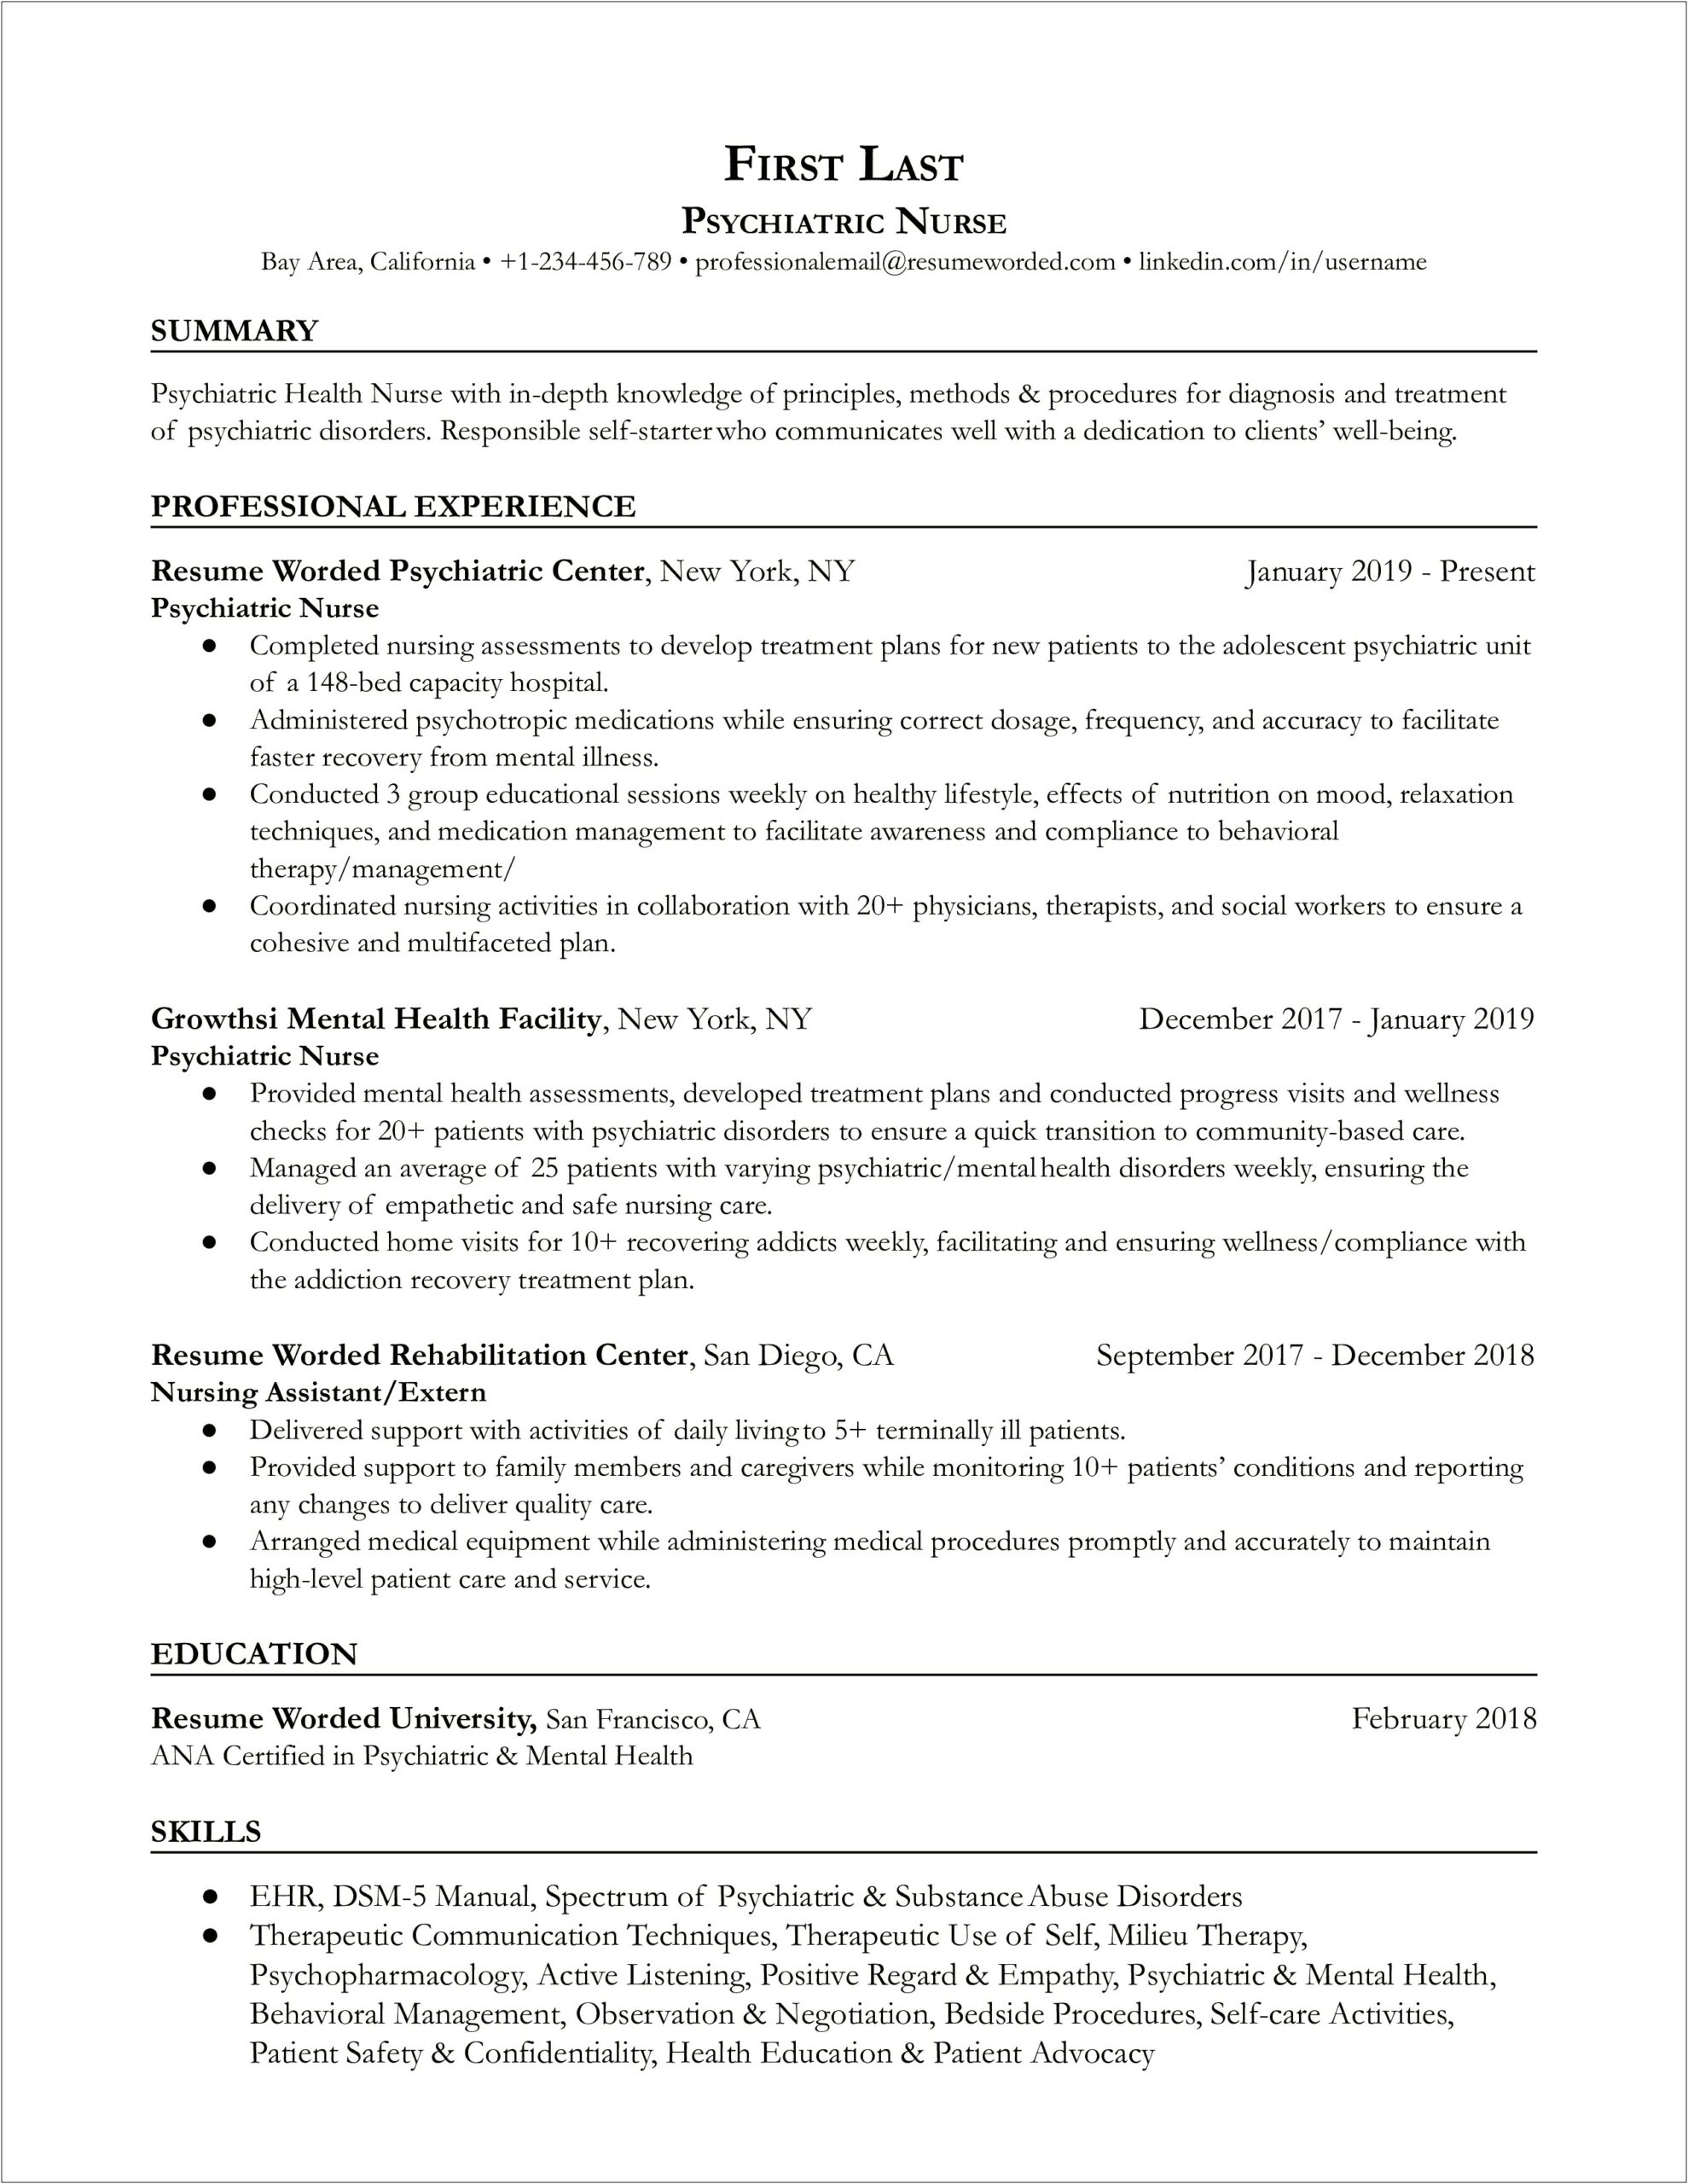 Lpn Health Care And Rehad Sample Resume